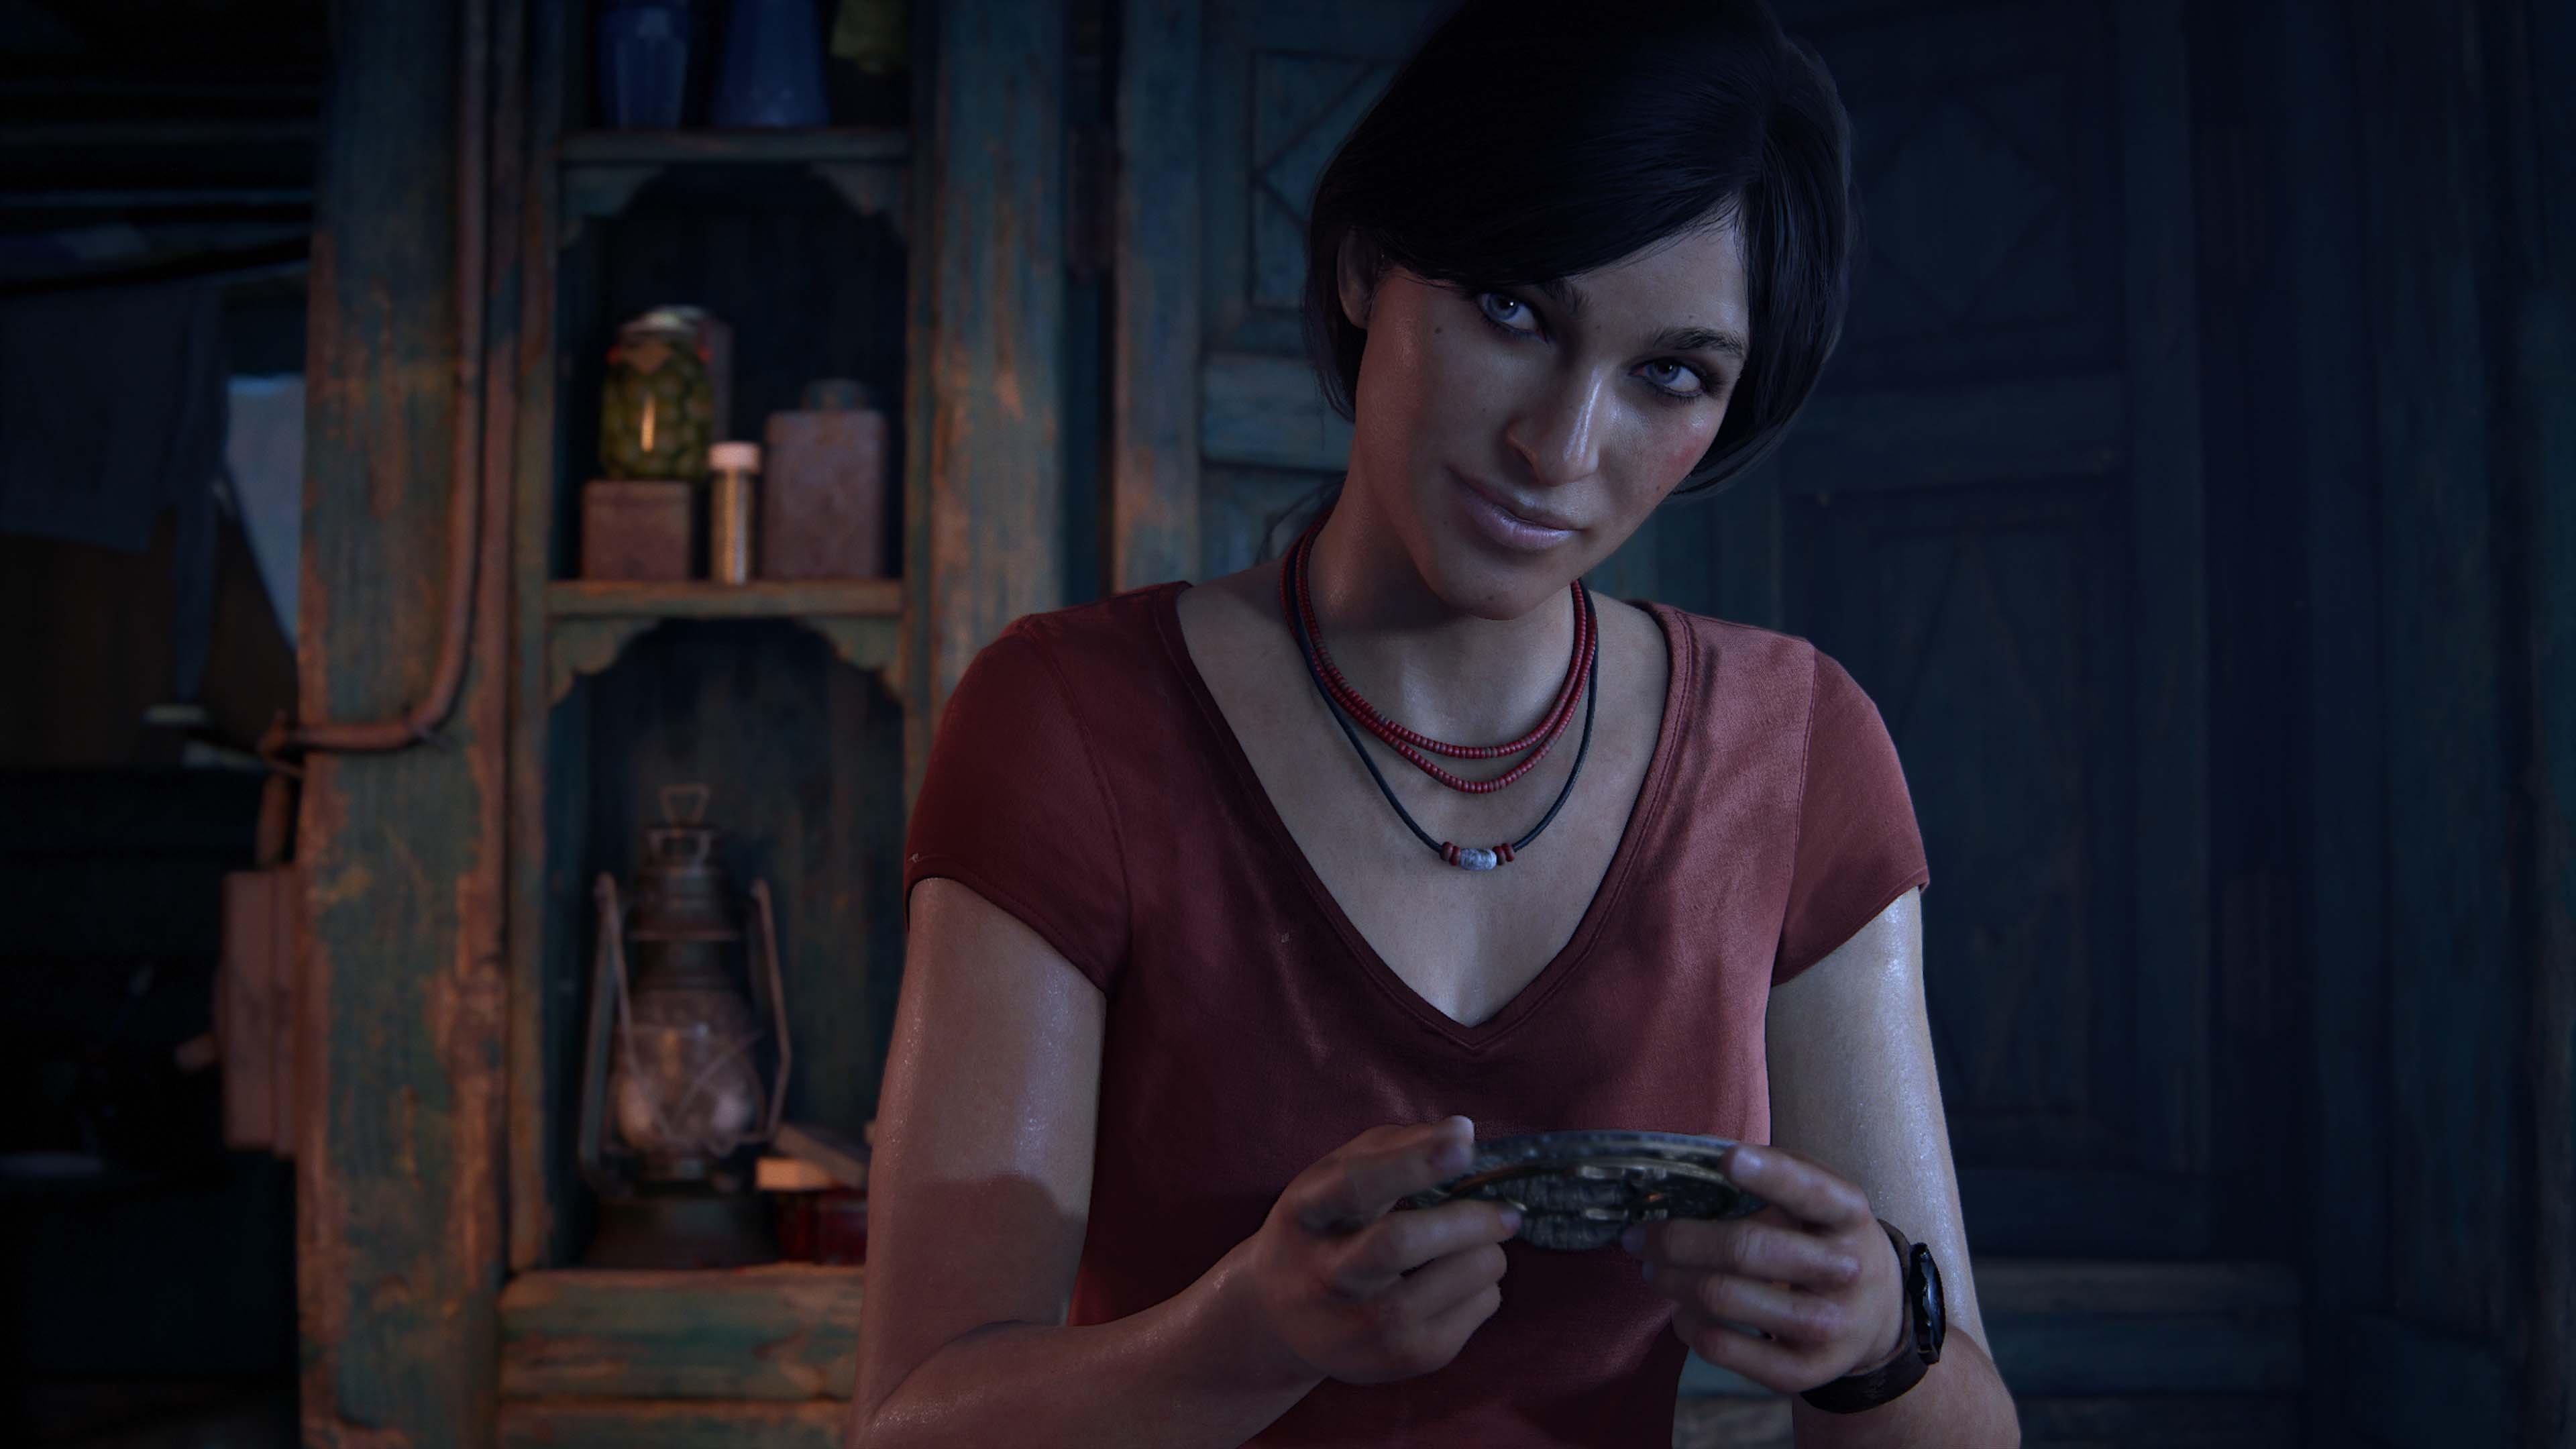 Uncharted: The lost legacy, Part - 4